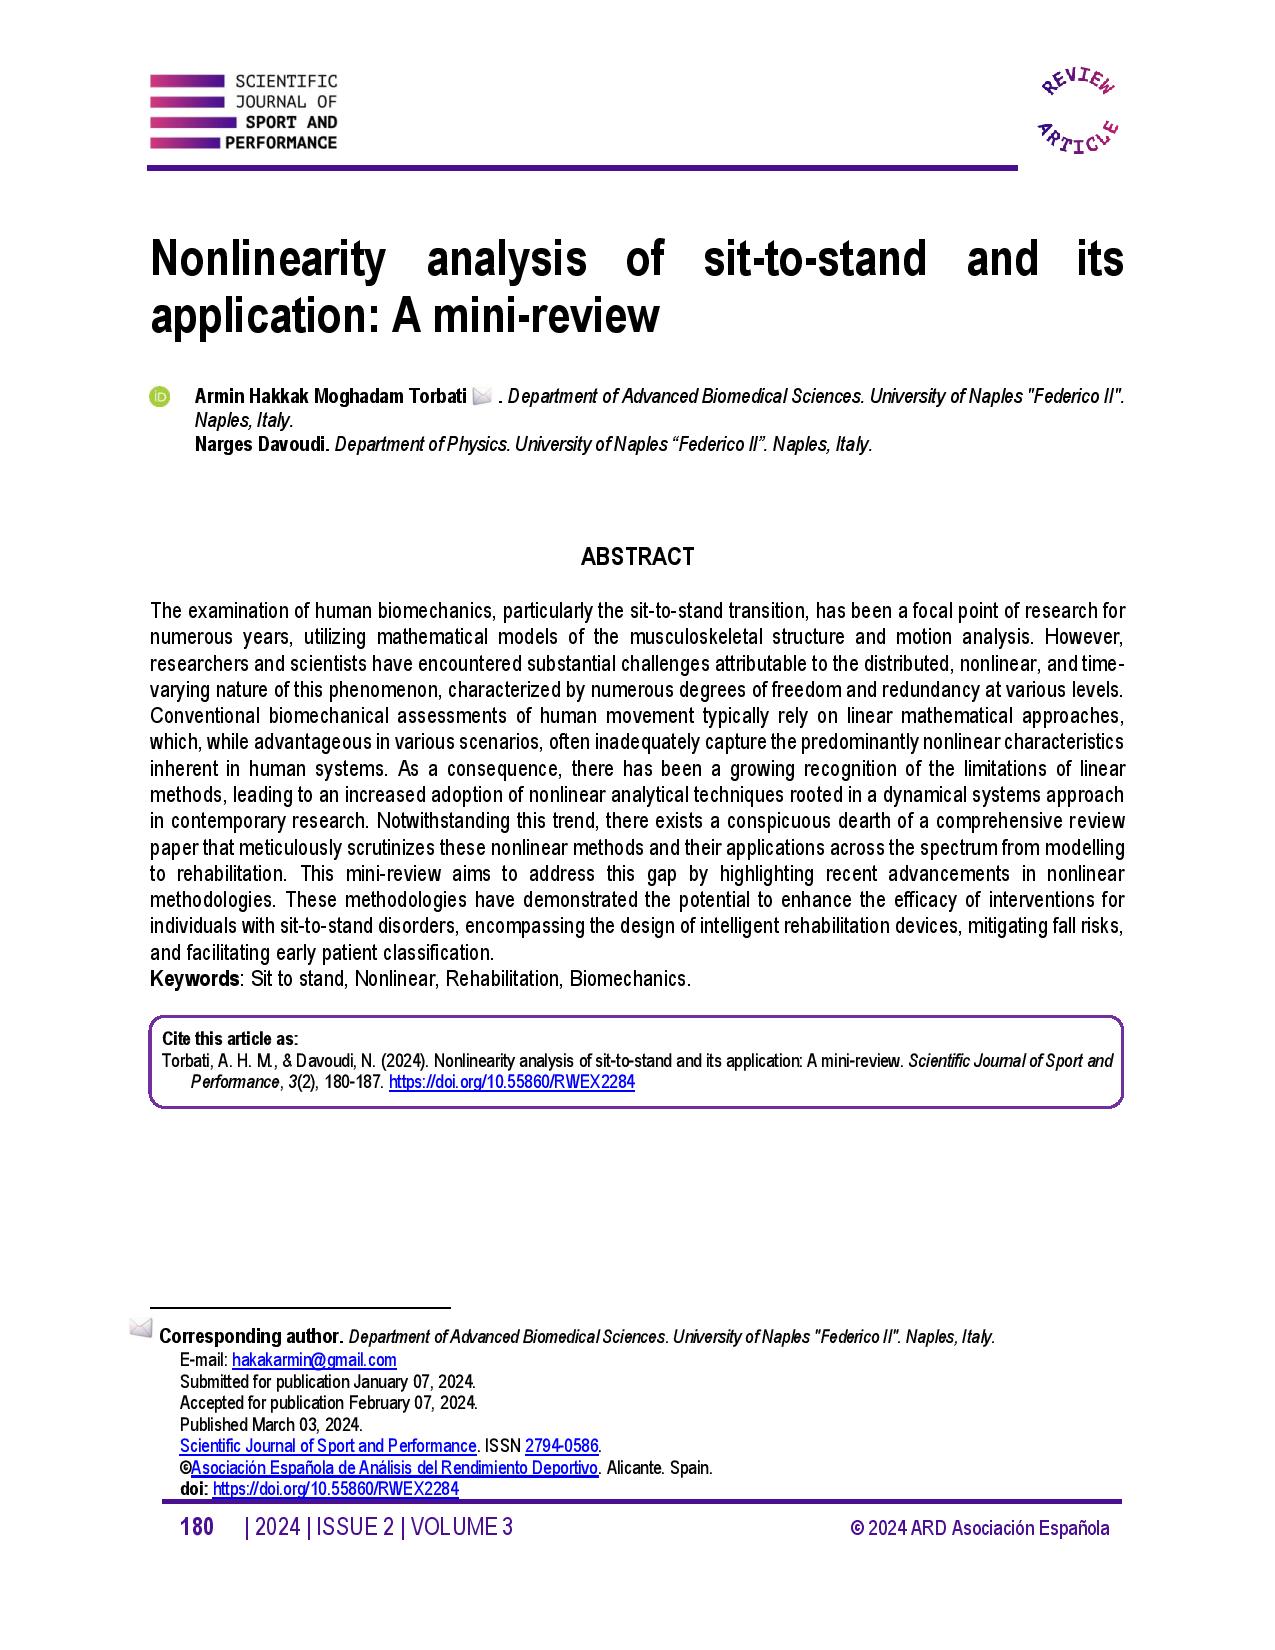 Nonlinearity analysis of sit-to-stand and its application: A mini-review